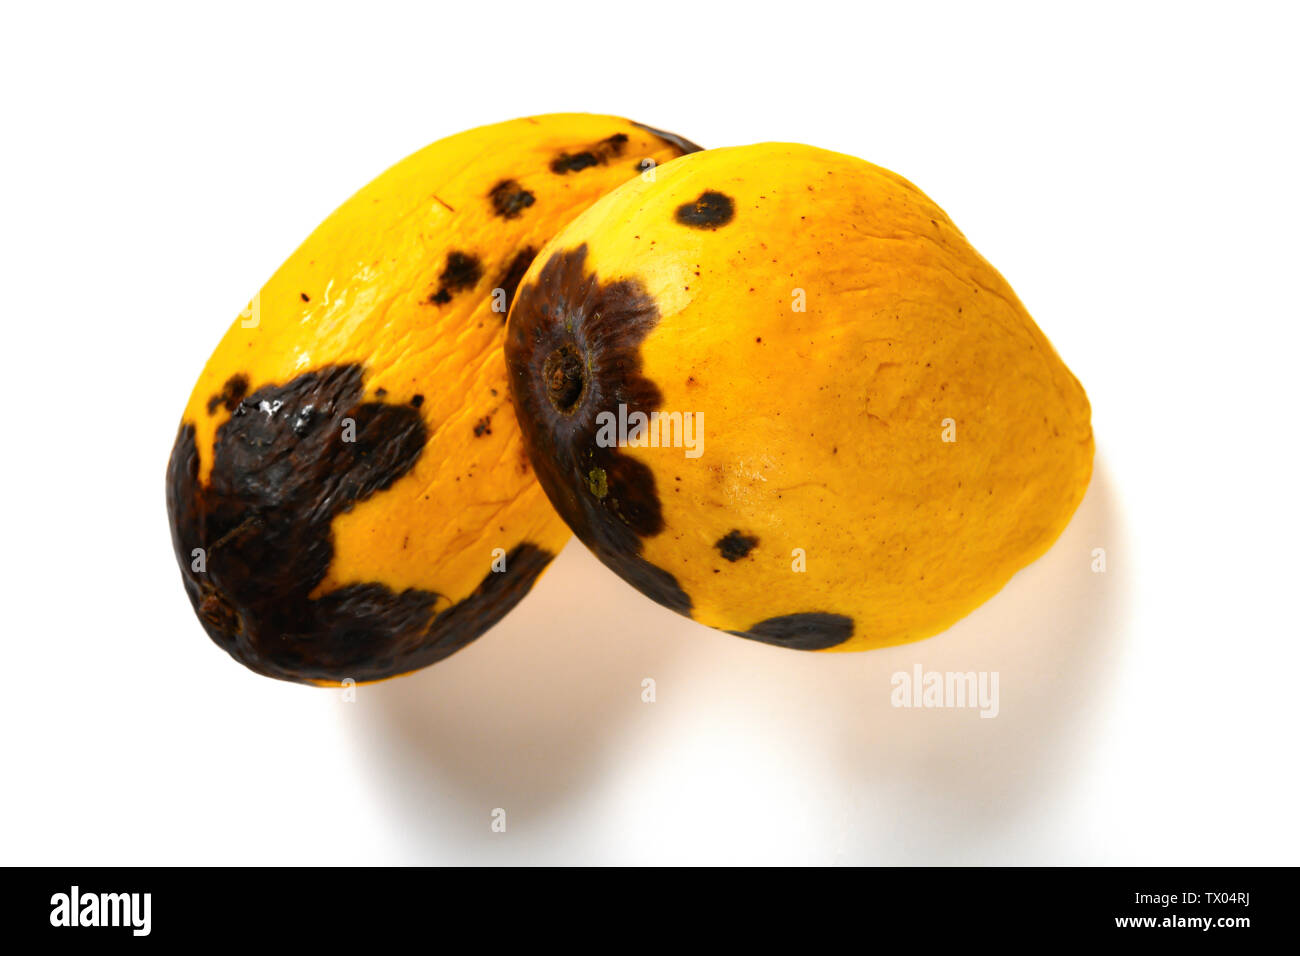 Top View Rotten Mango Image & Photo (Free Trial)